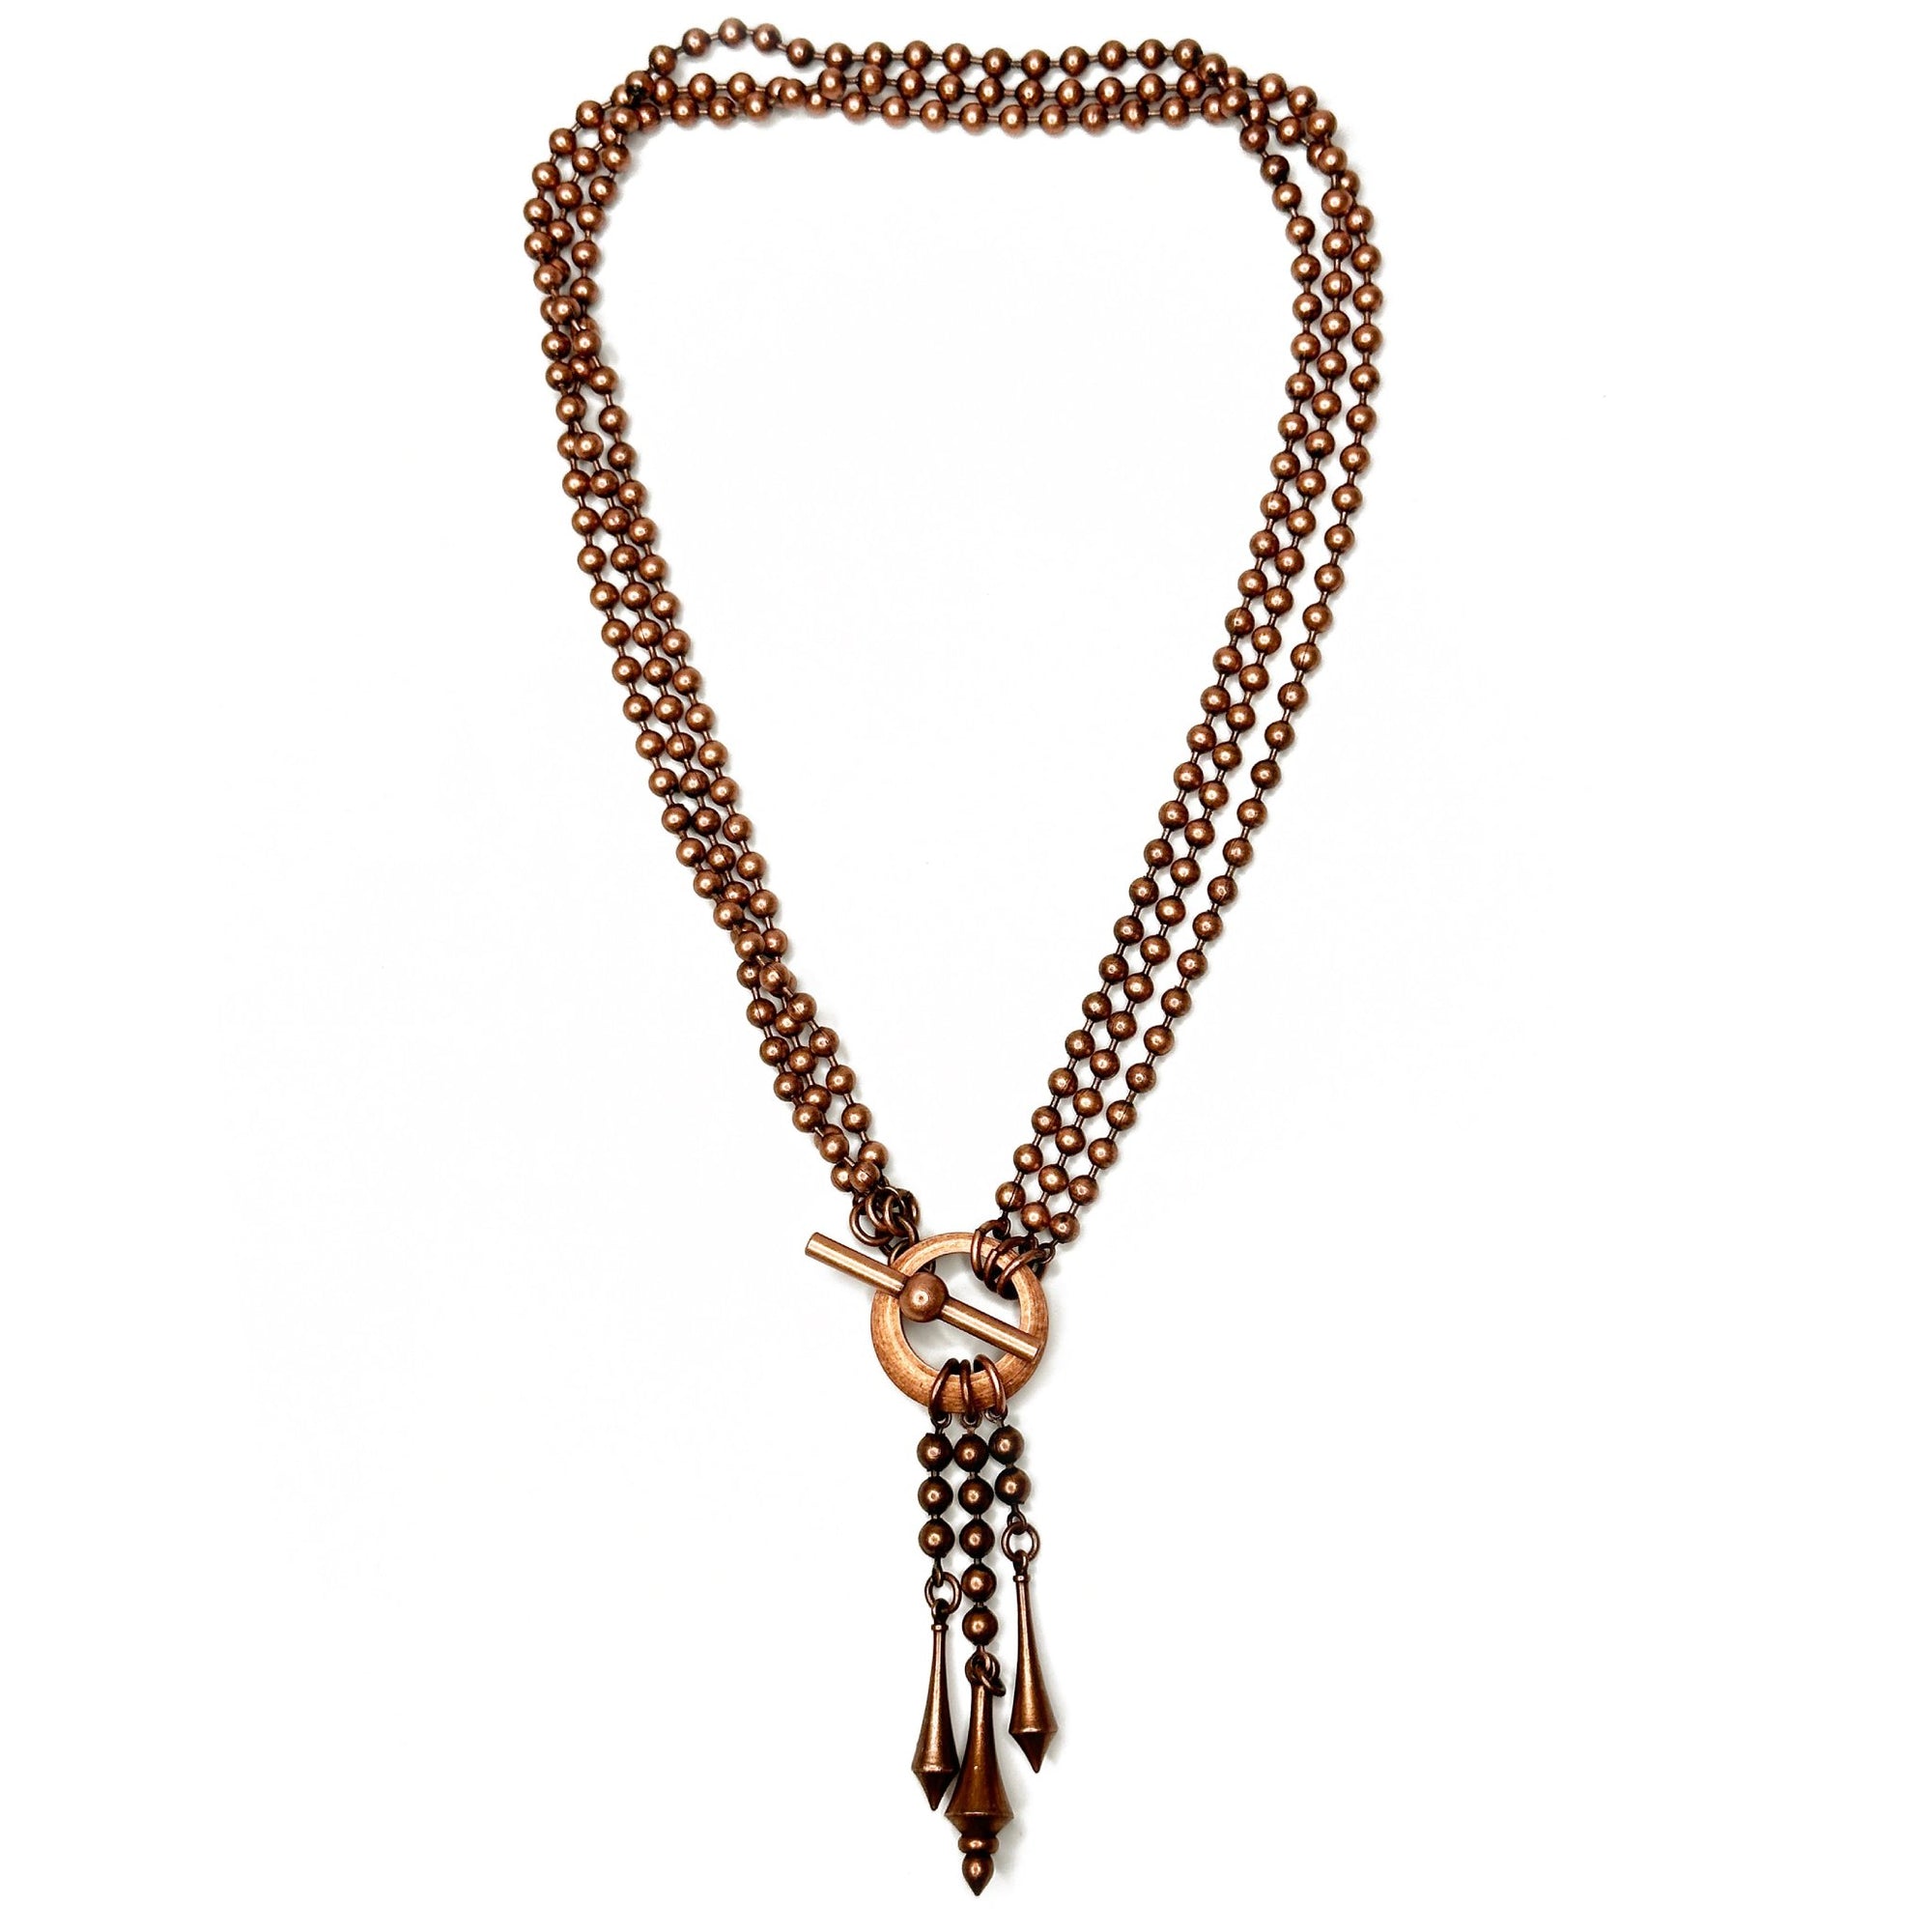 3-Strand Bead Chain Necklace with Geometric Drops | Erica Zap Designs